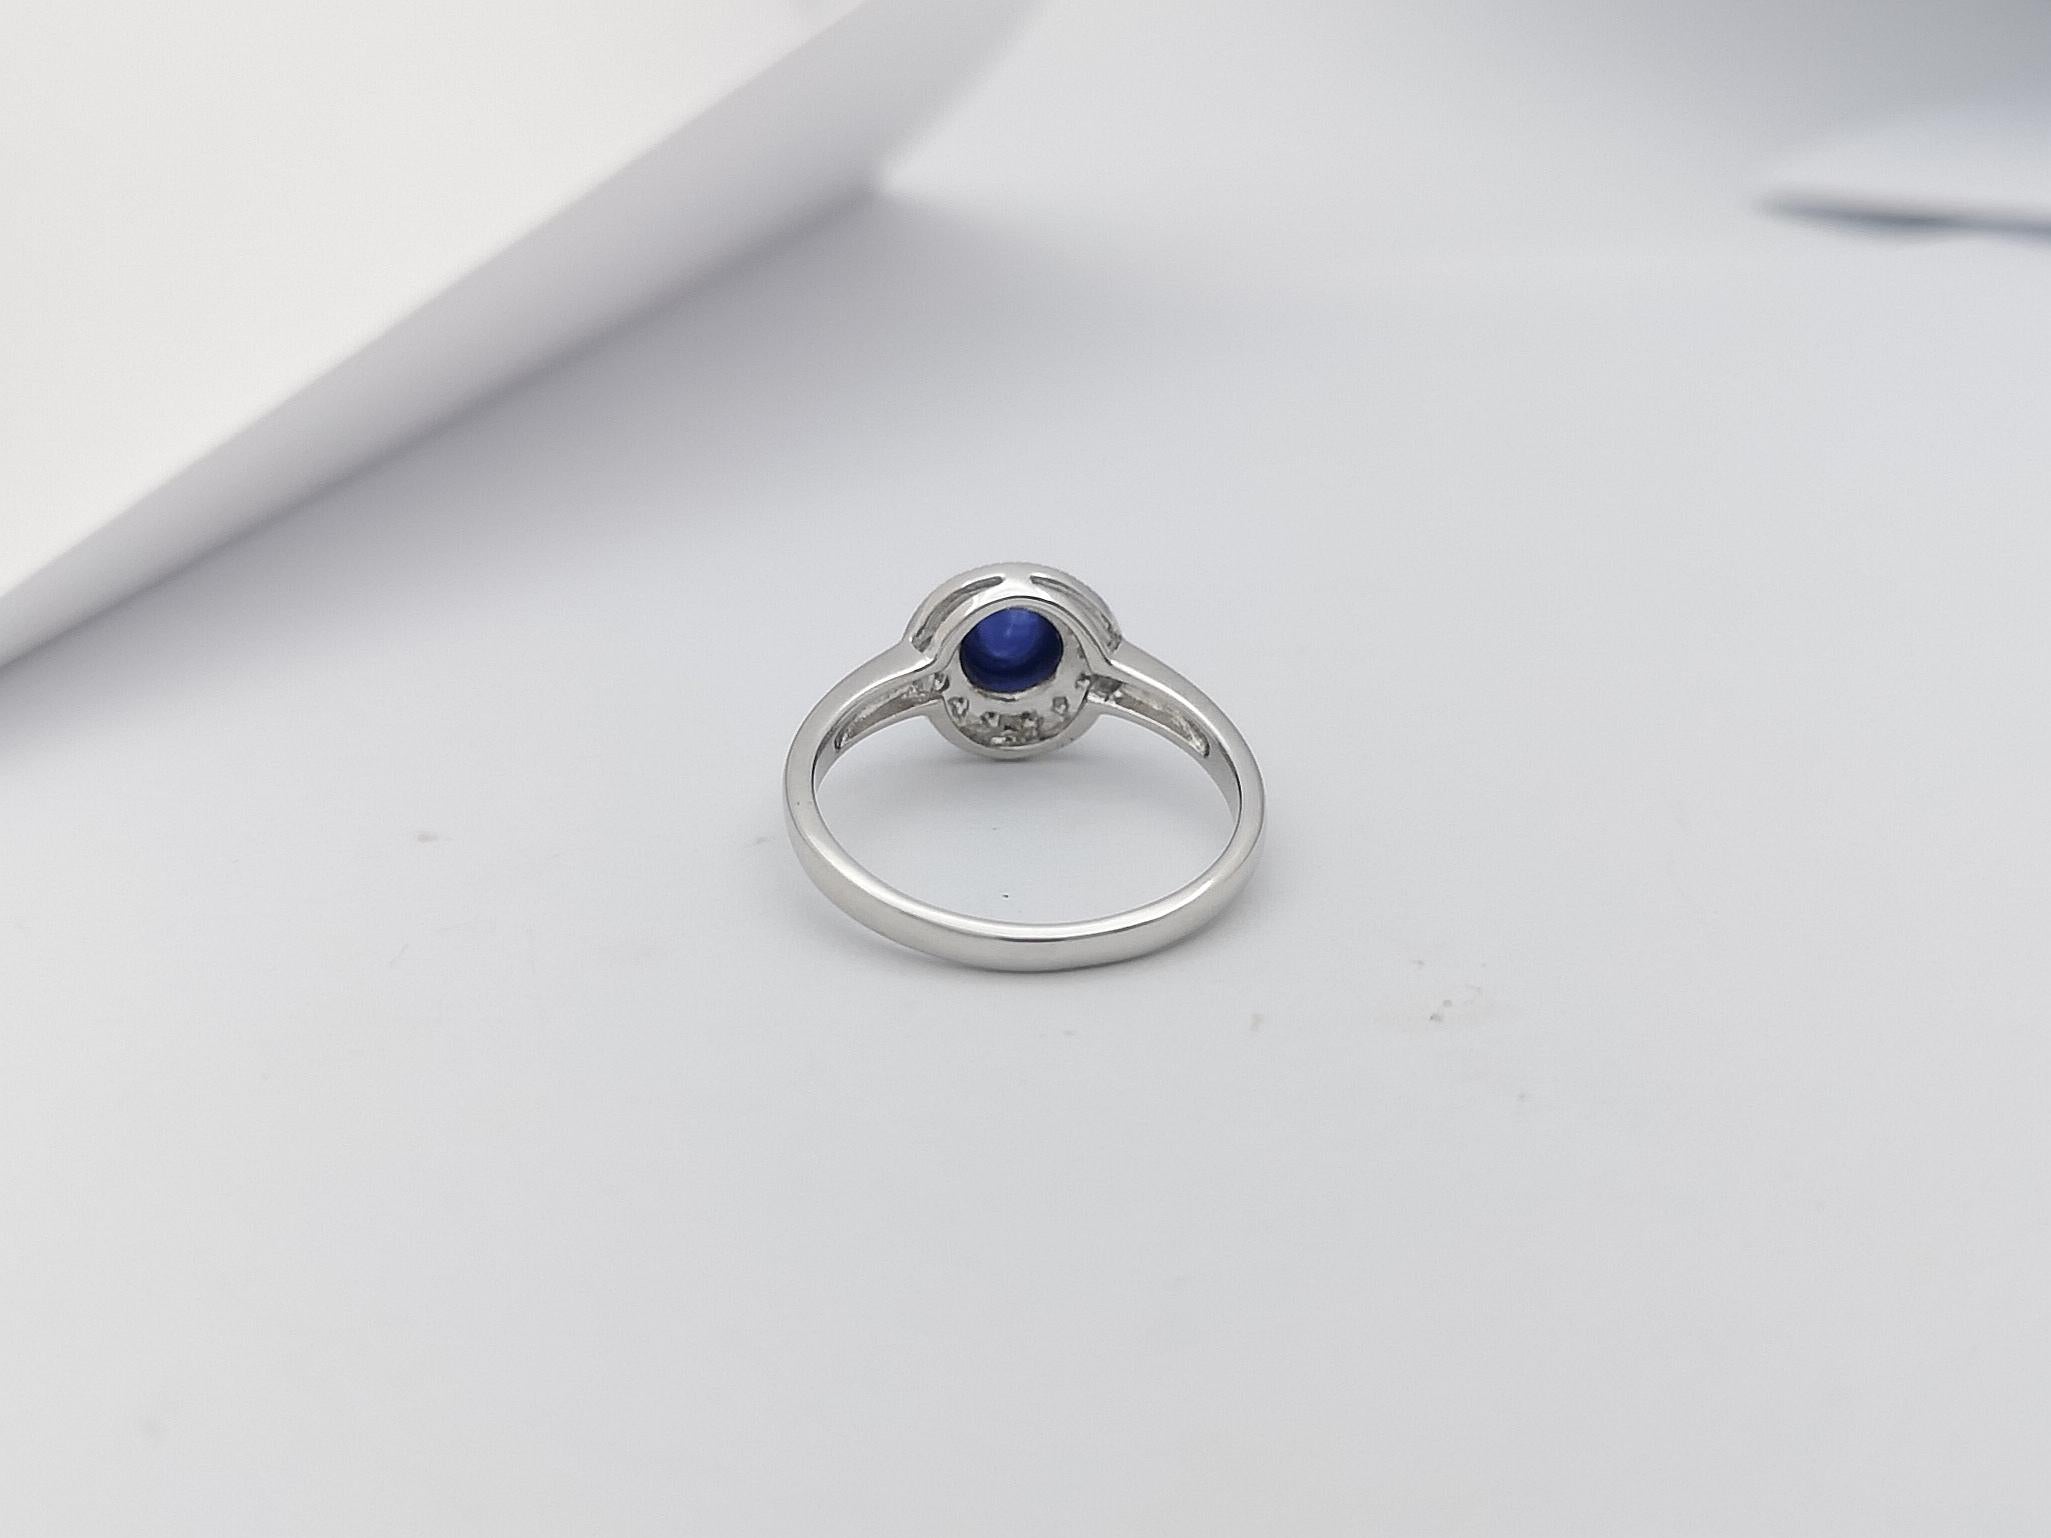 Cabochon Blue Sapphire with Diamond Ring Set in 18 Karat White Gold Settings For Sale 6